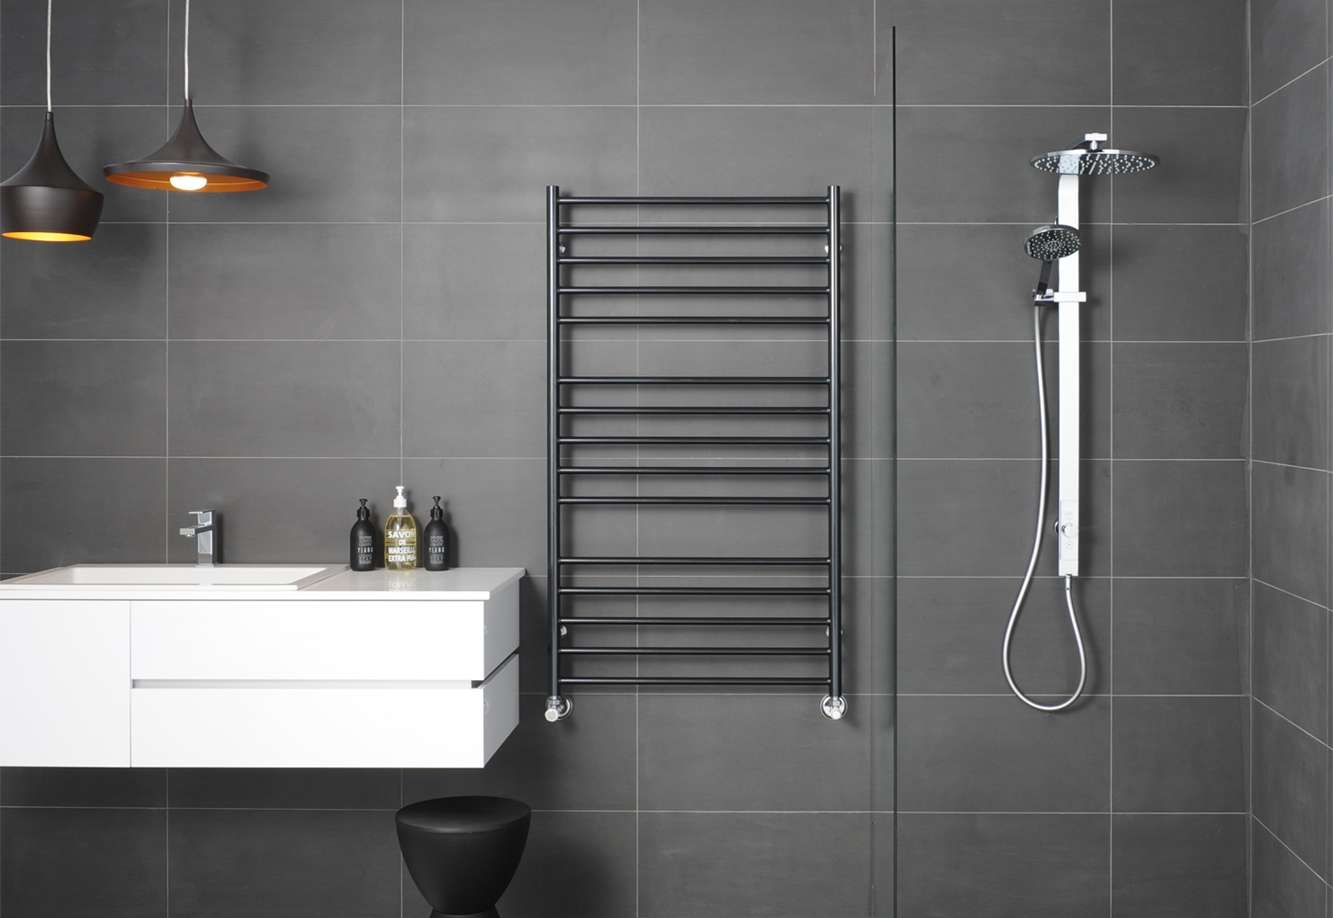 Top 10 Towel Rails: Which is better to choose for drying things? Warm, stylish and comfortable - the best models of 2019 (+ Reviews)